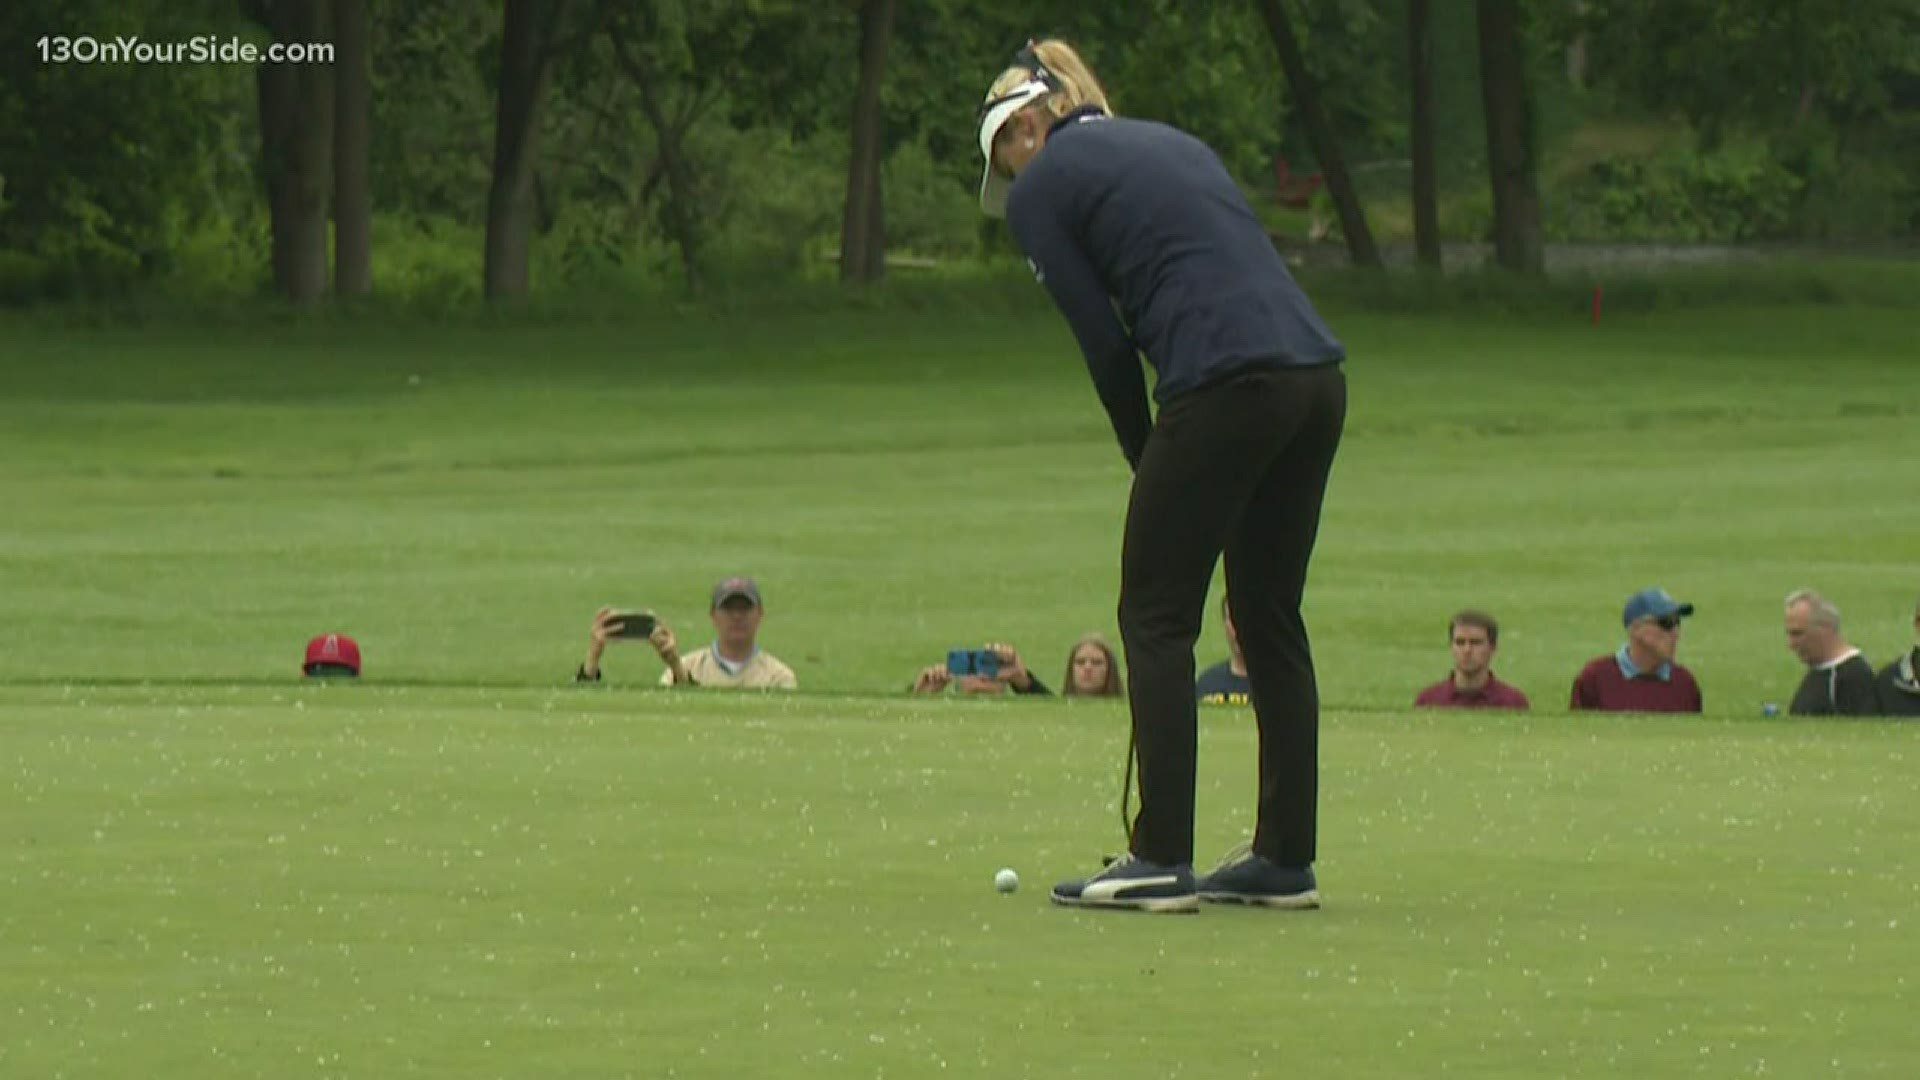 The Meijer LPGA classic is being moved to early October, because of COVID-19. The event, at Blythefield country club, was originally scheduled for June.